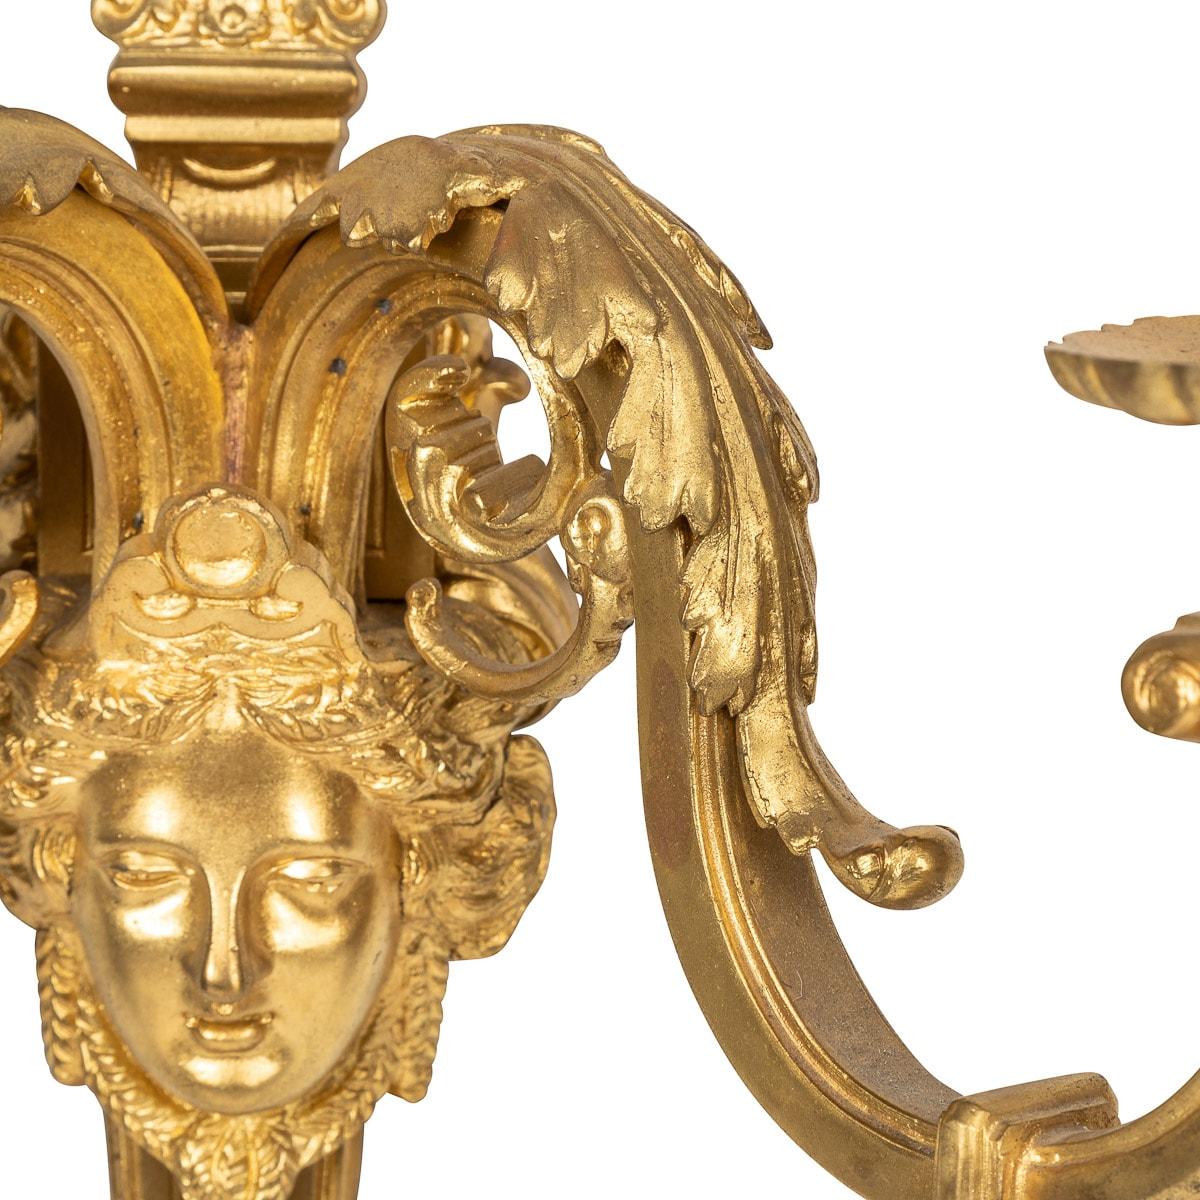 19th Century French Régence Style Ormolu D'appliques Wall Lights, C.1830 For Sale 1